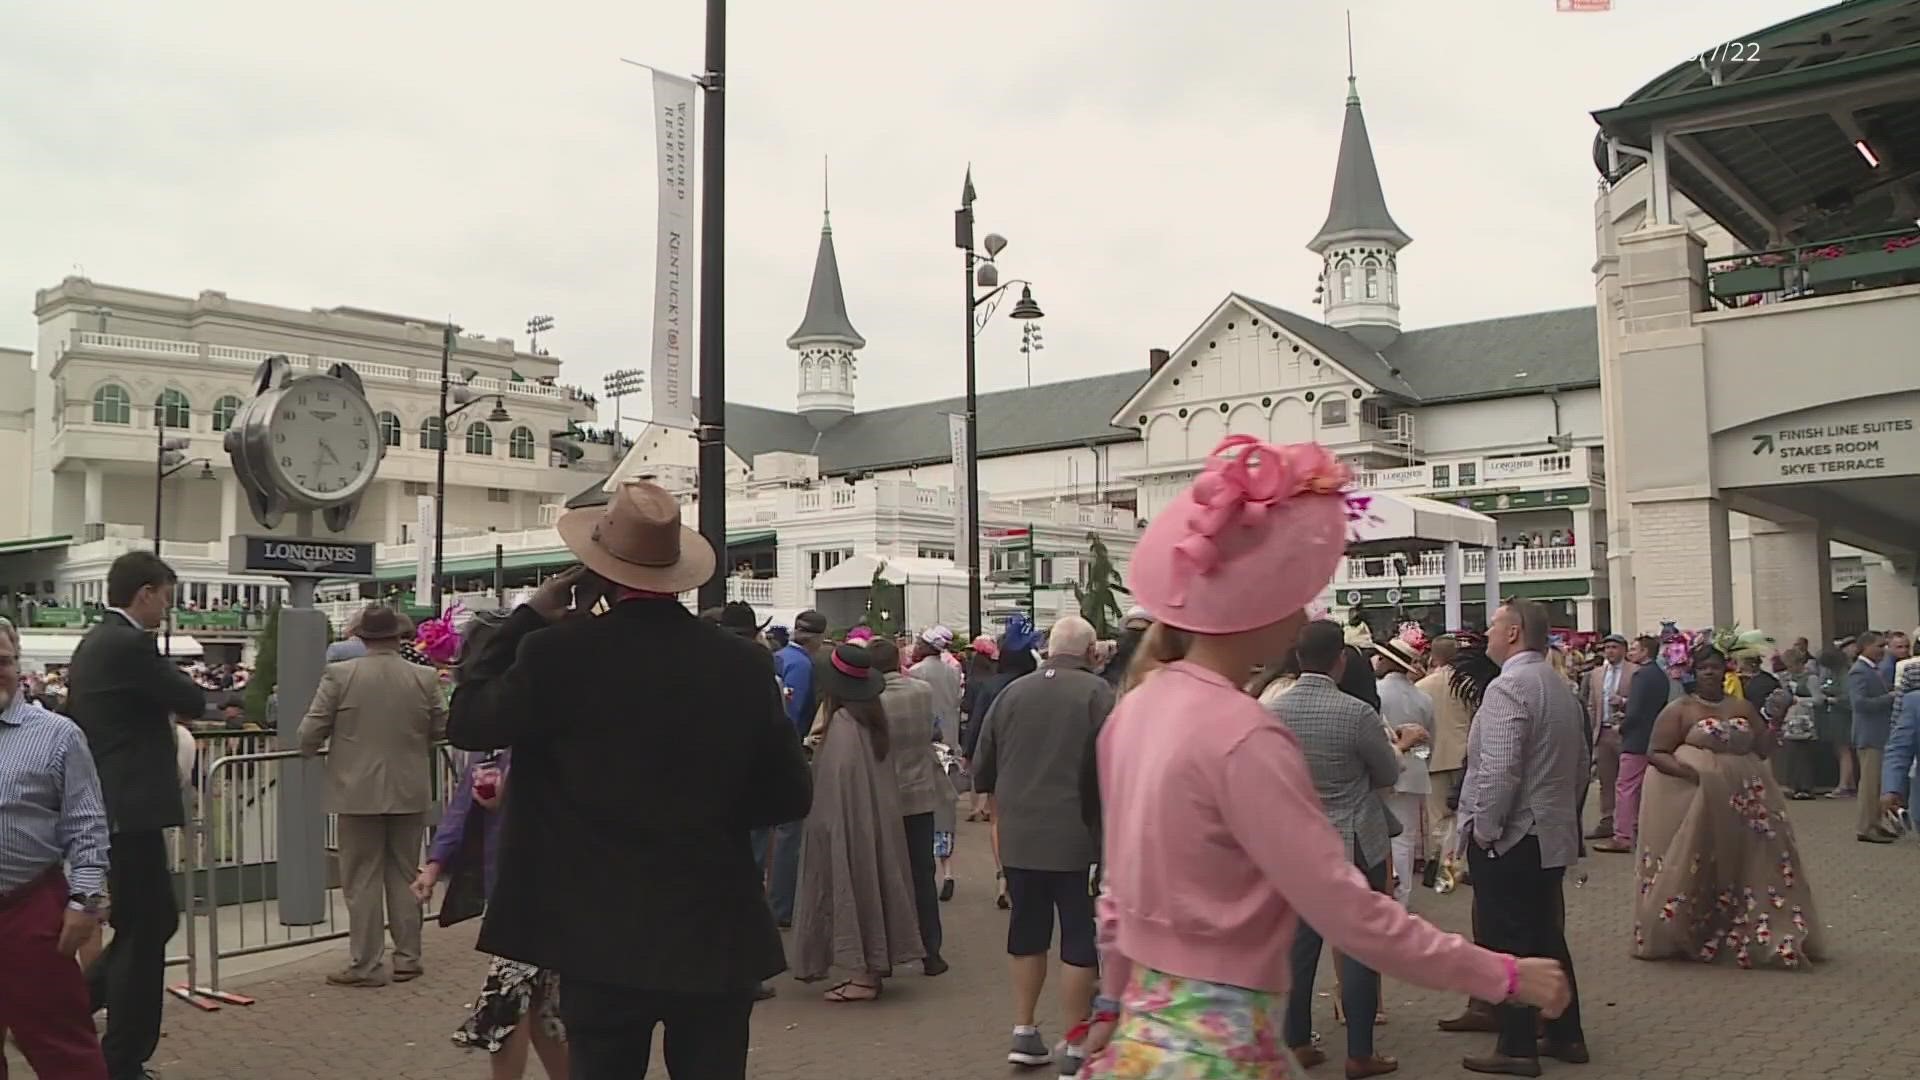 The return to a normal Kentucky Derby brought in a $77 million increase in revenue for the famed Louisville race track.